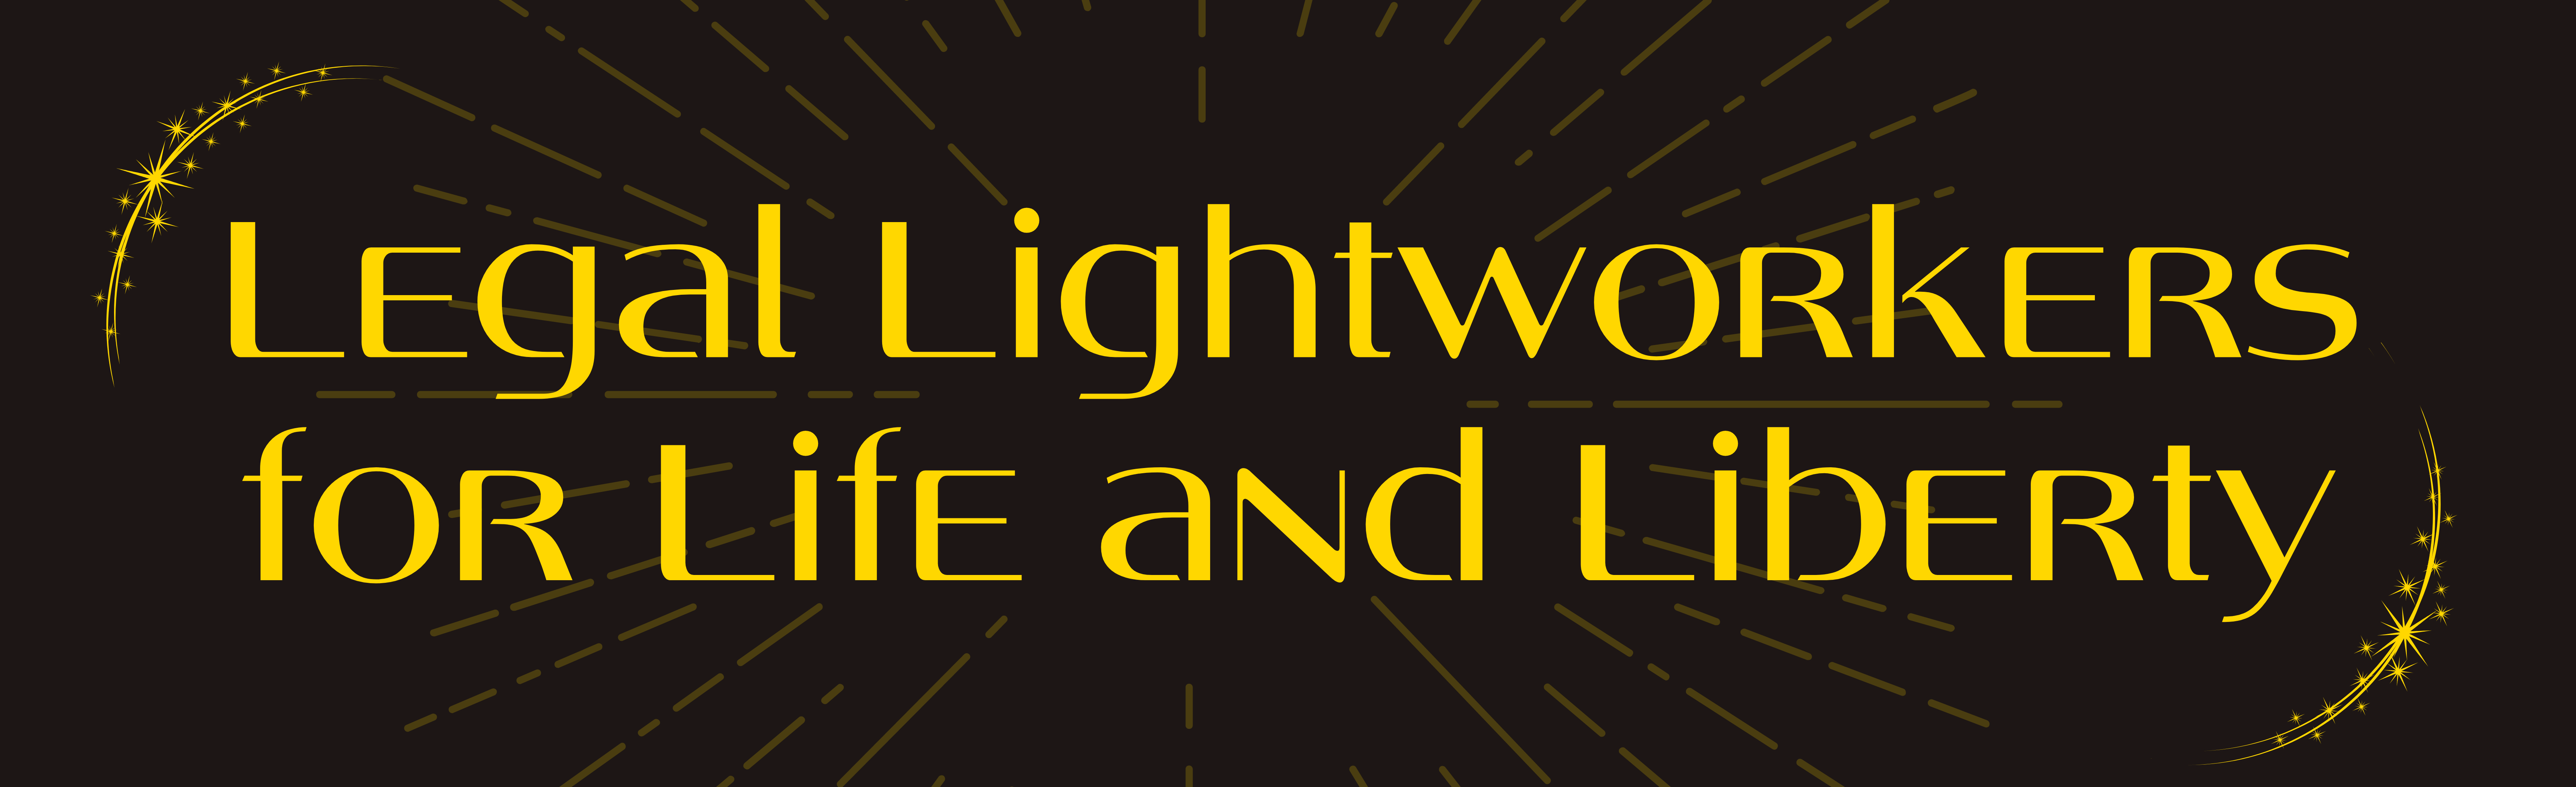 Legal Lightworkers for Life and Liberty